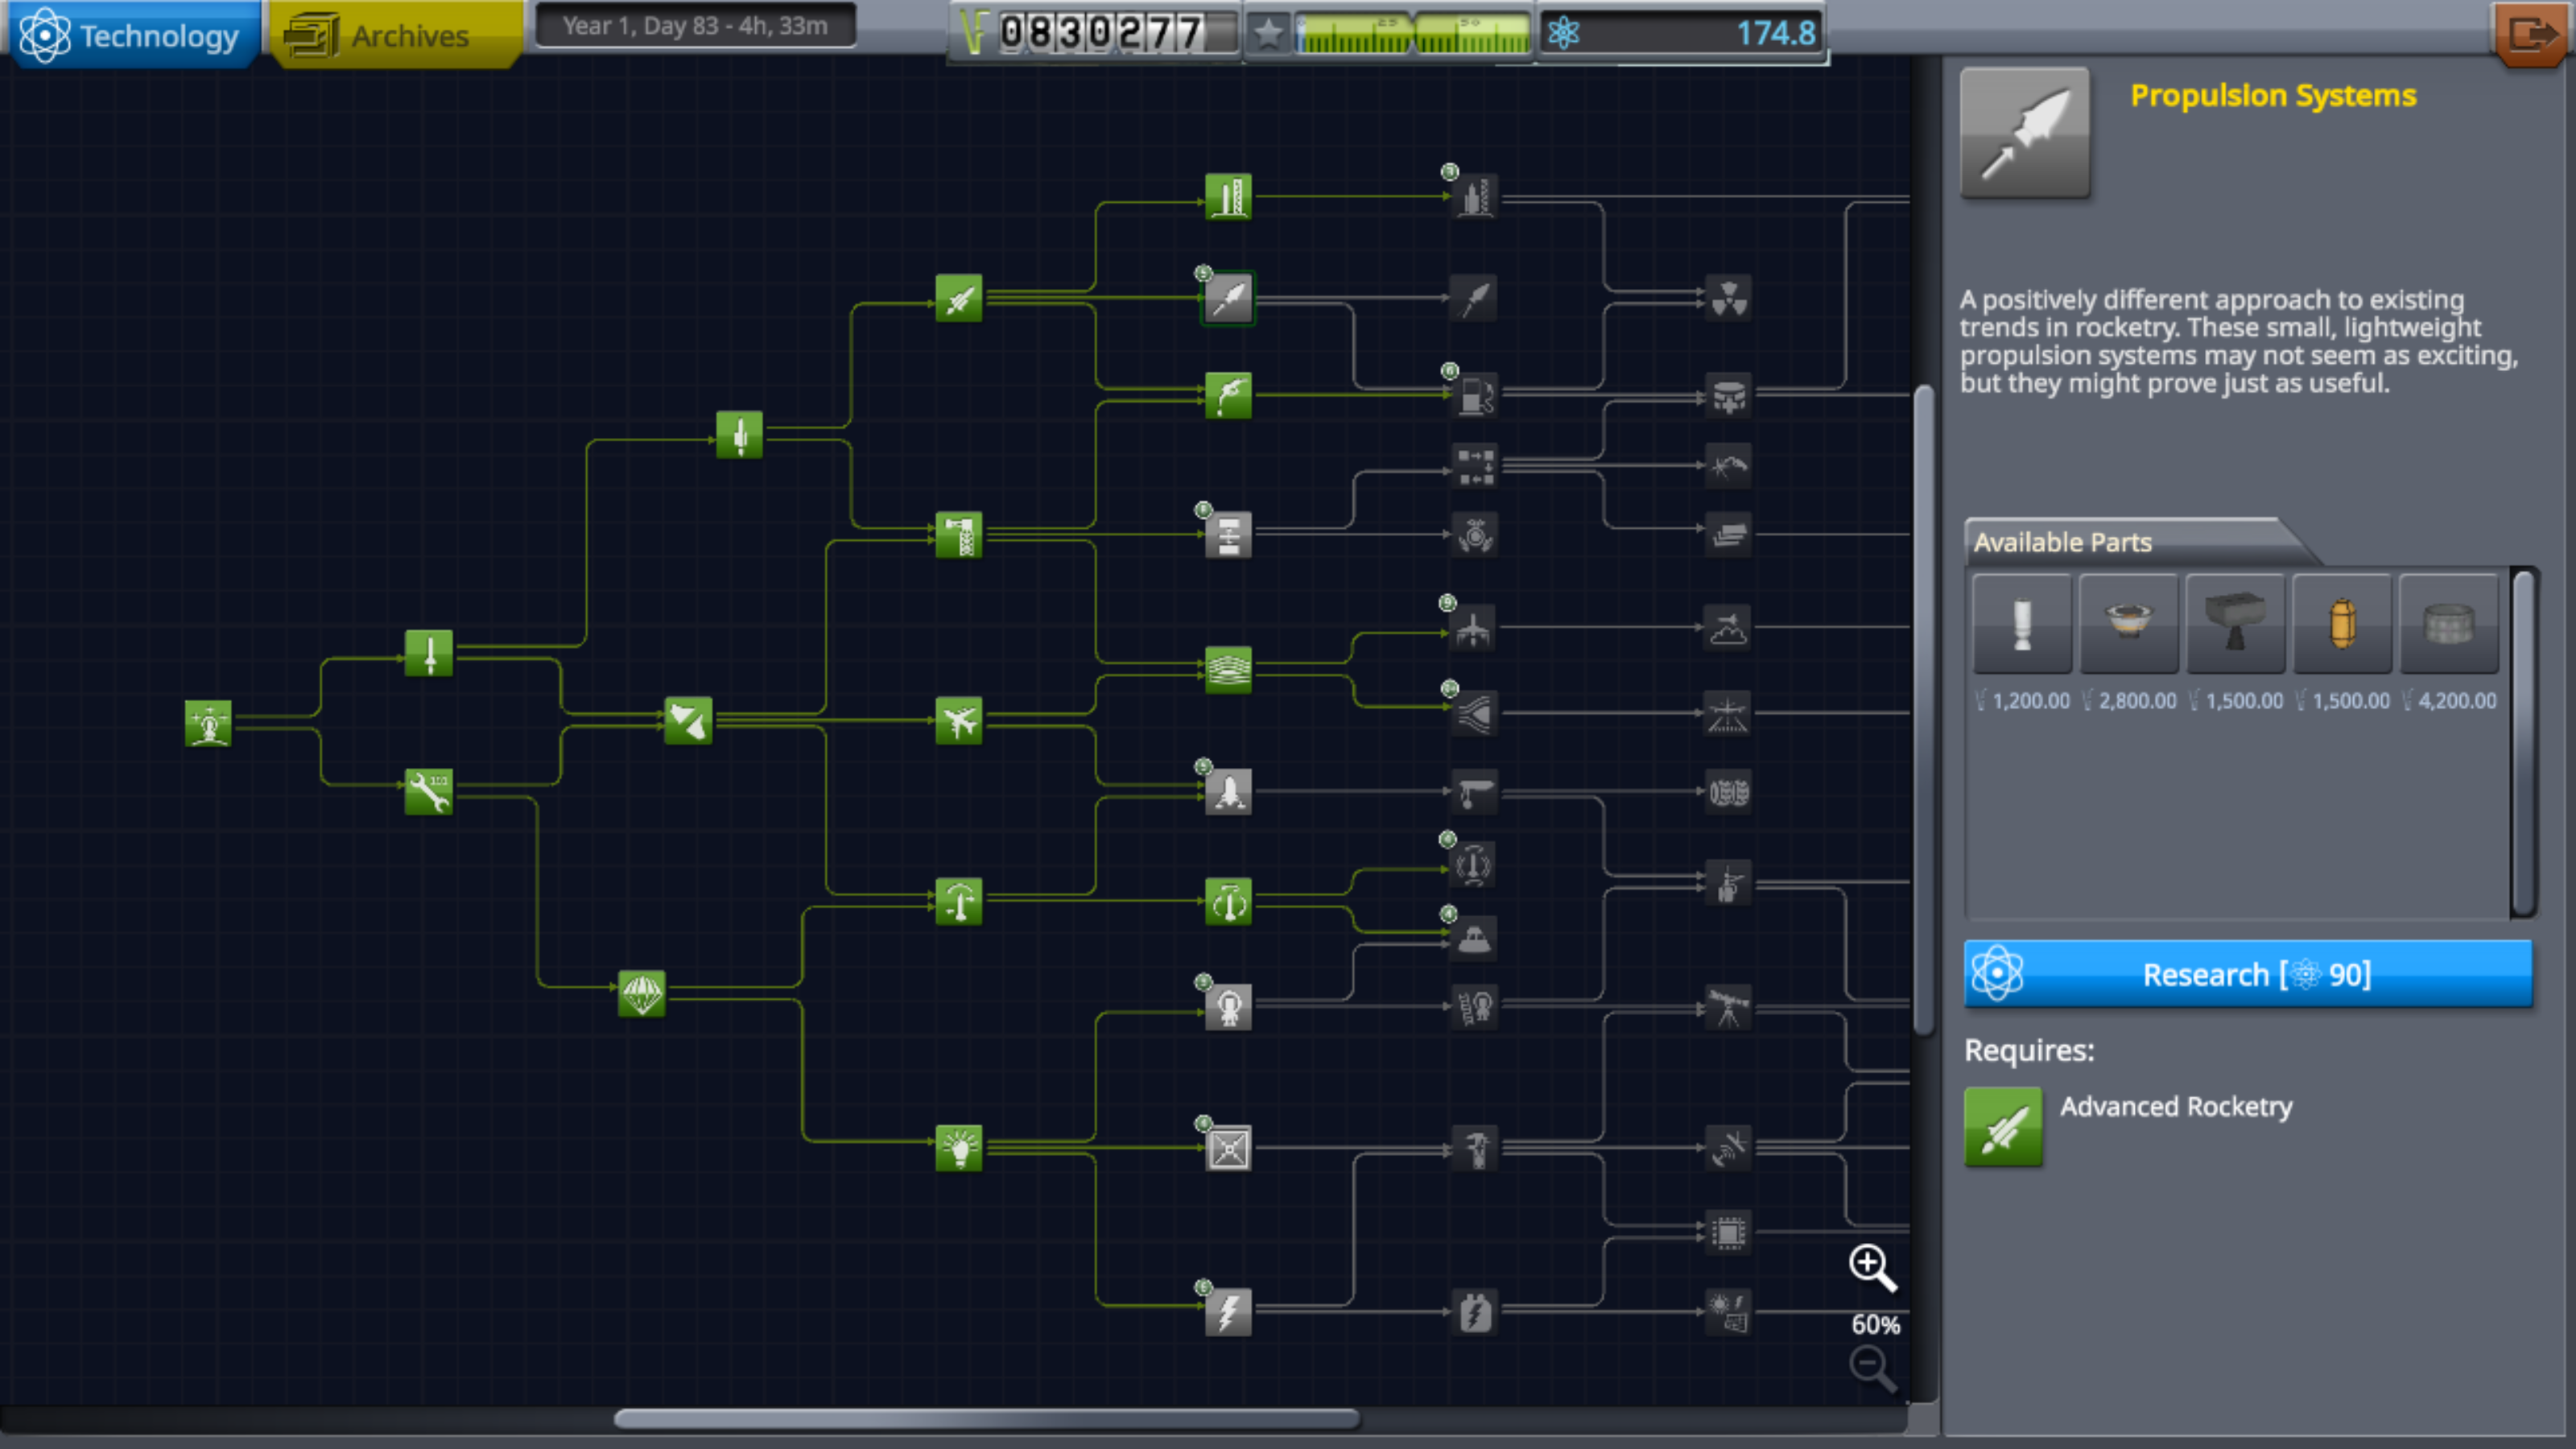 KSP Tech Tree "yes, this is the real state of my campaign in Kerbal Space Program."